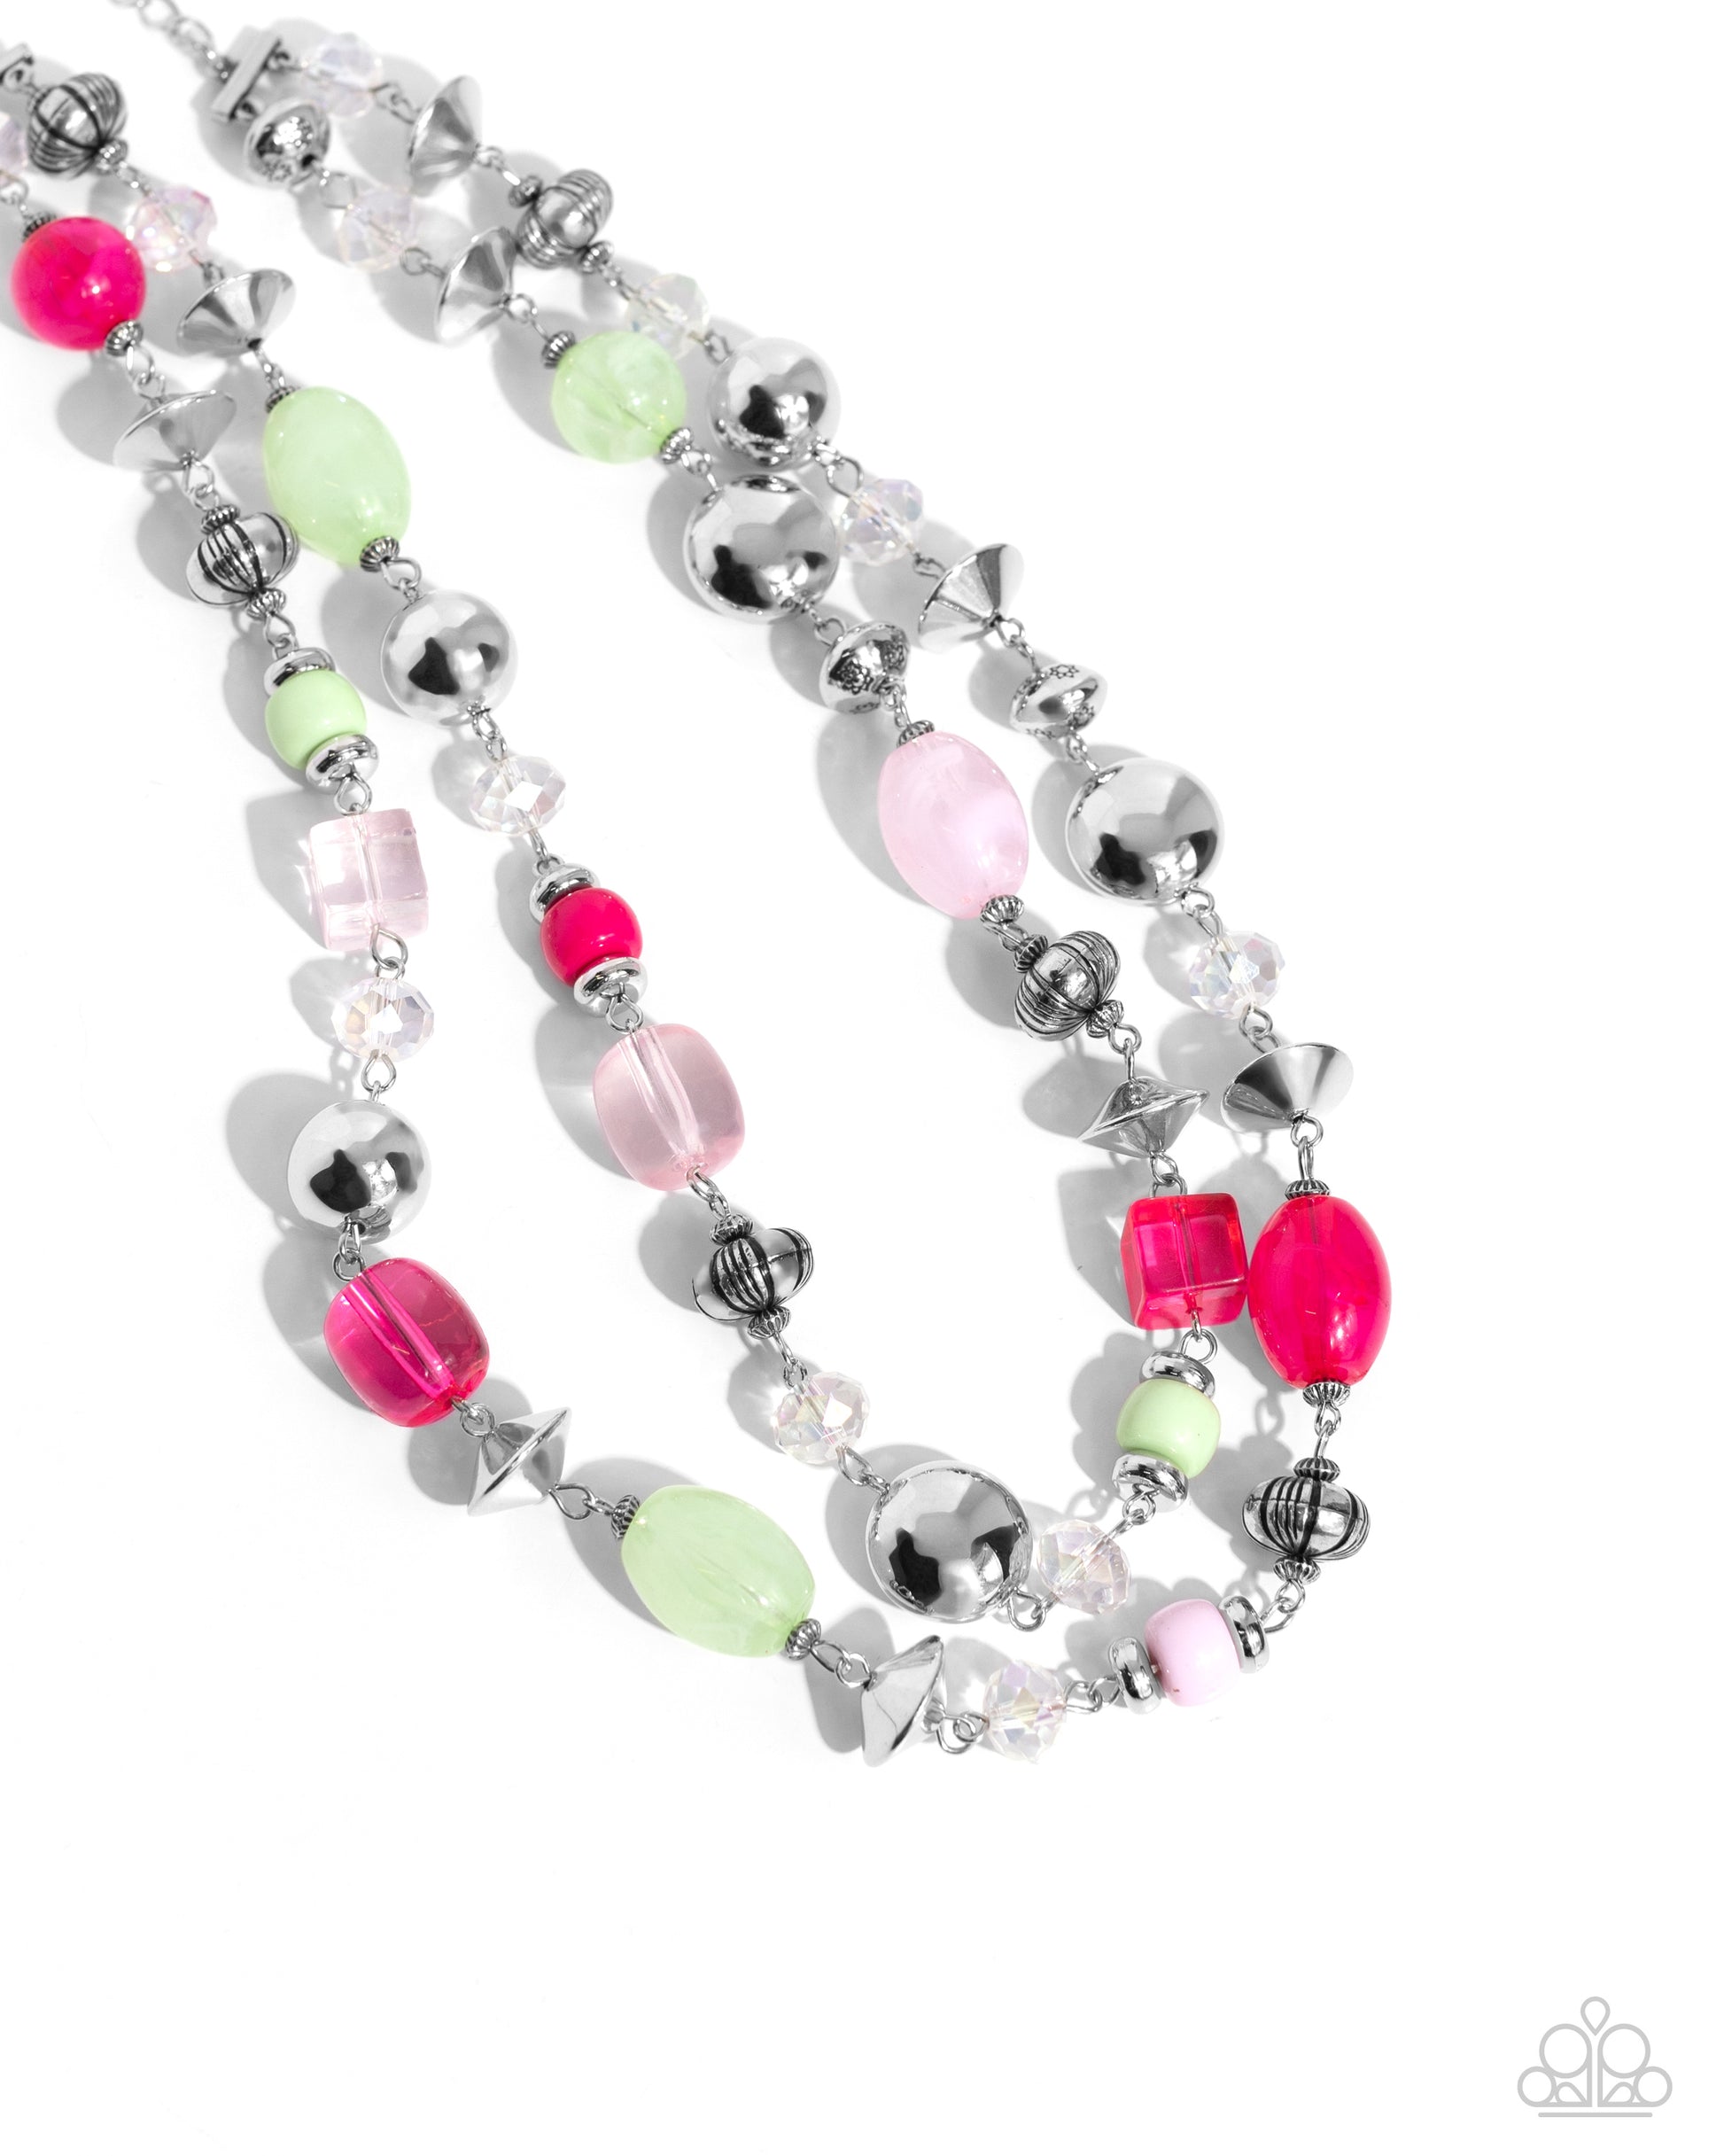 Paparazzi Accessories - Playful Past - Pink Necklaces featuring a variety of opacities, a collection of Pink Peacock, light pink, and Mint beads join various textured silver beads and faceted iridescent beads along the neckline in two layers for a playfully, colorful look. Features an adjustable clasp closure. Due to its prismatic palette, color may vary.  Sold as one individual necklace. Includes one pair of matching earrings.